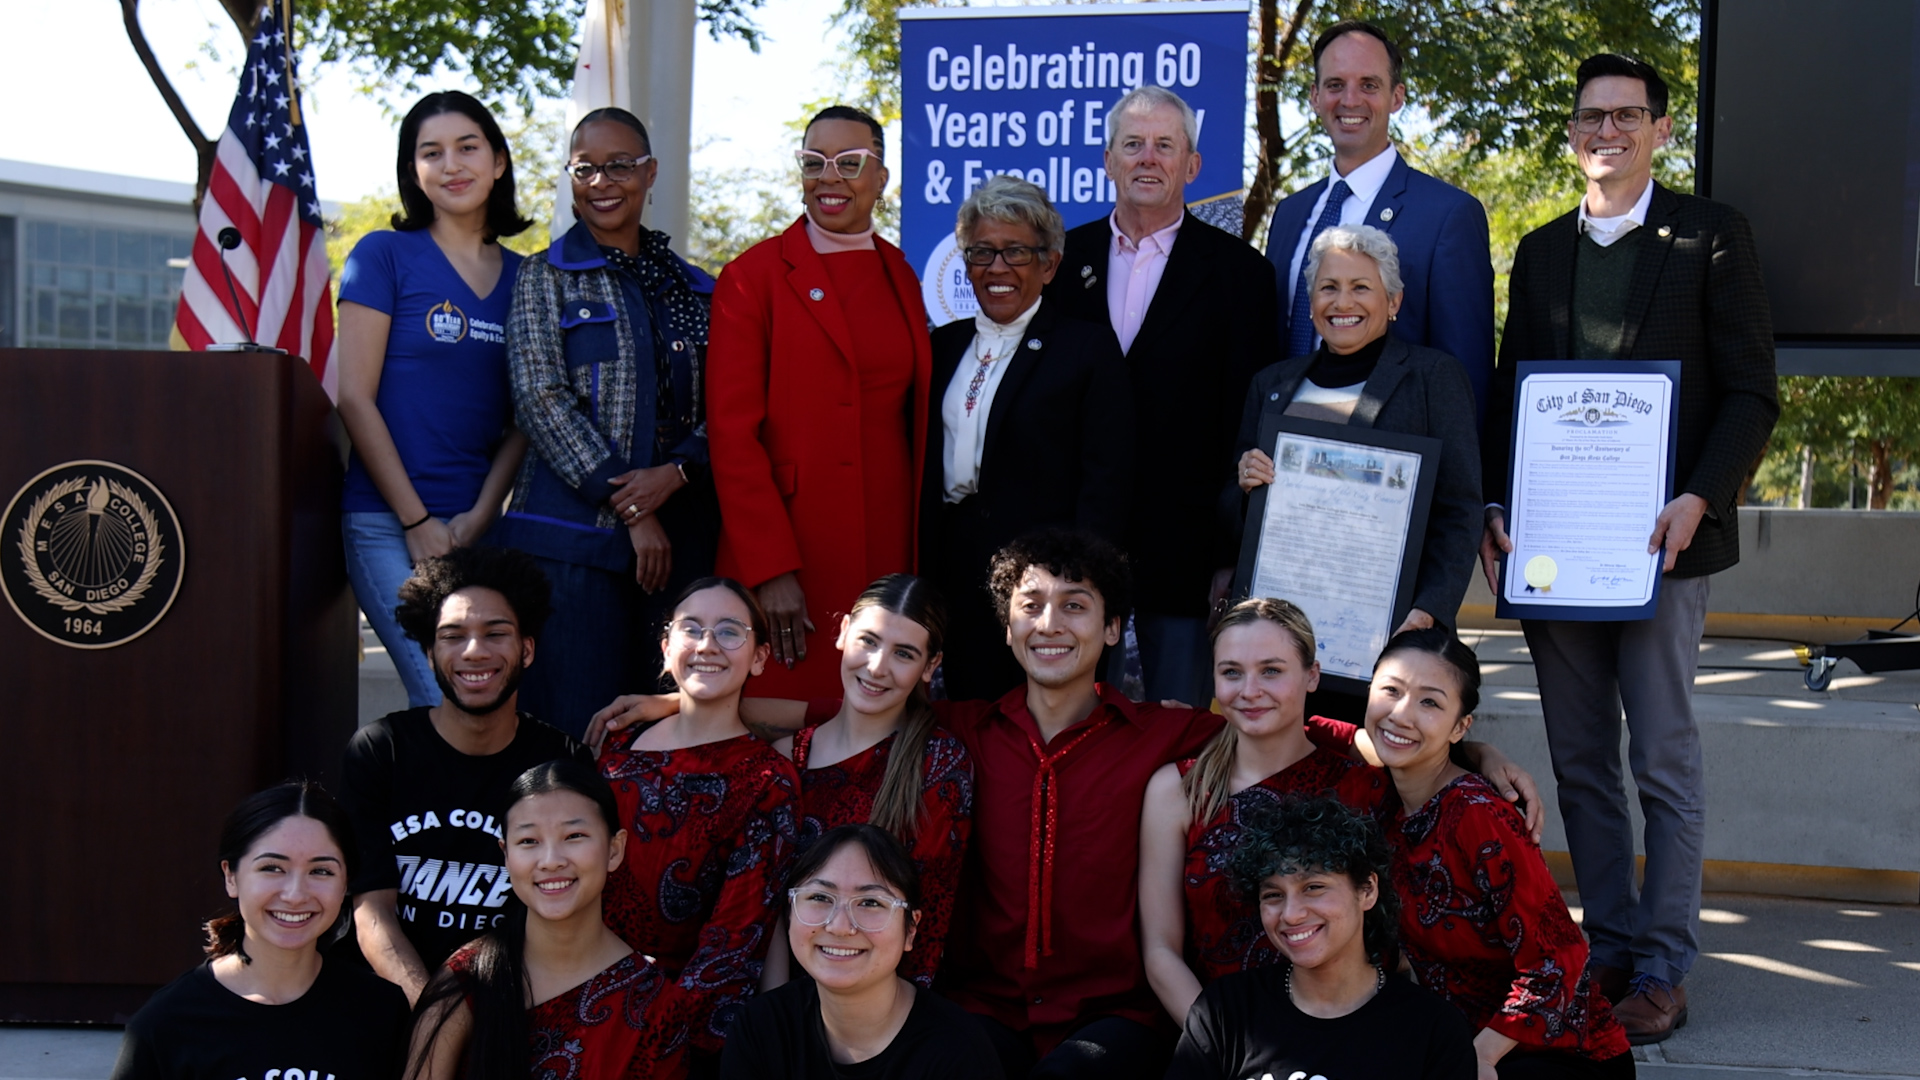 Mesa College's 60th anniversary Featured Image